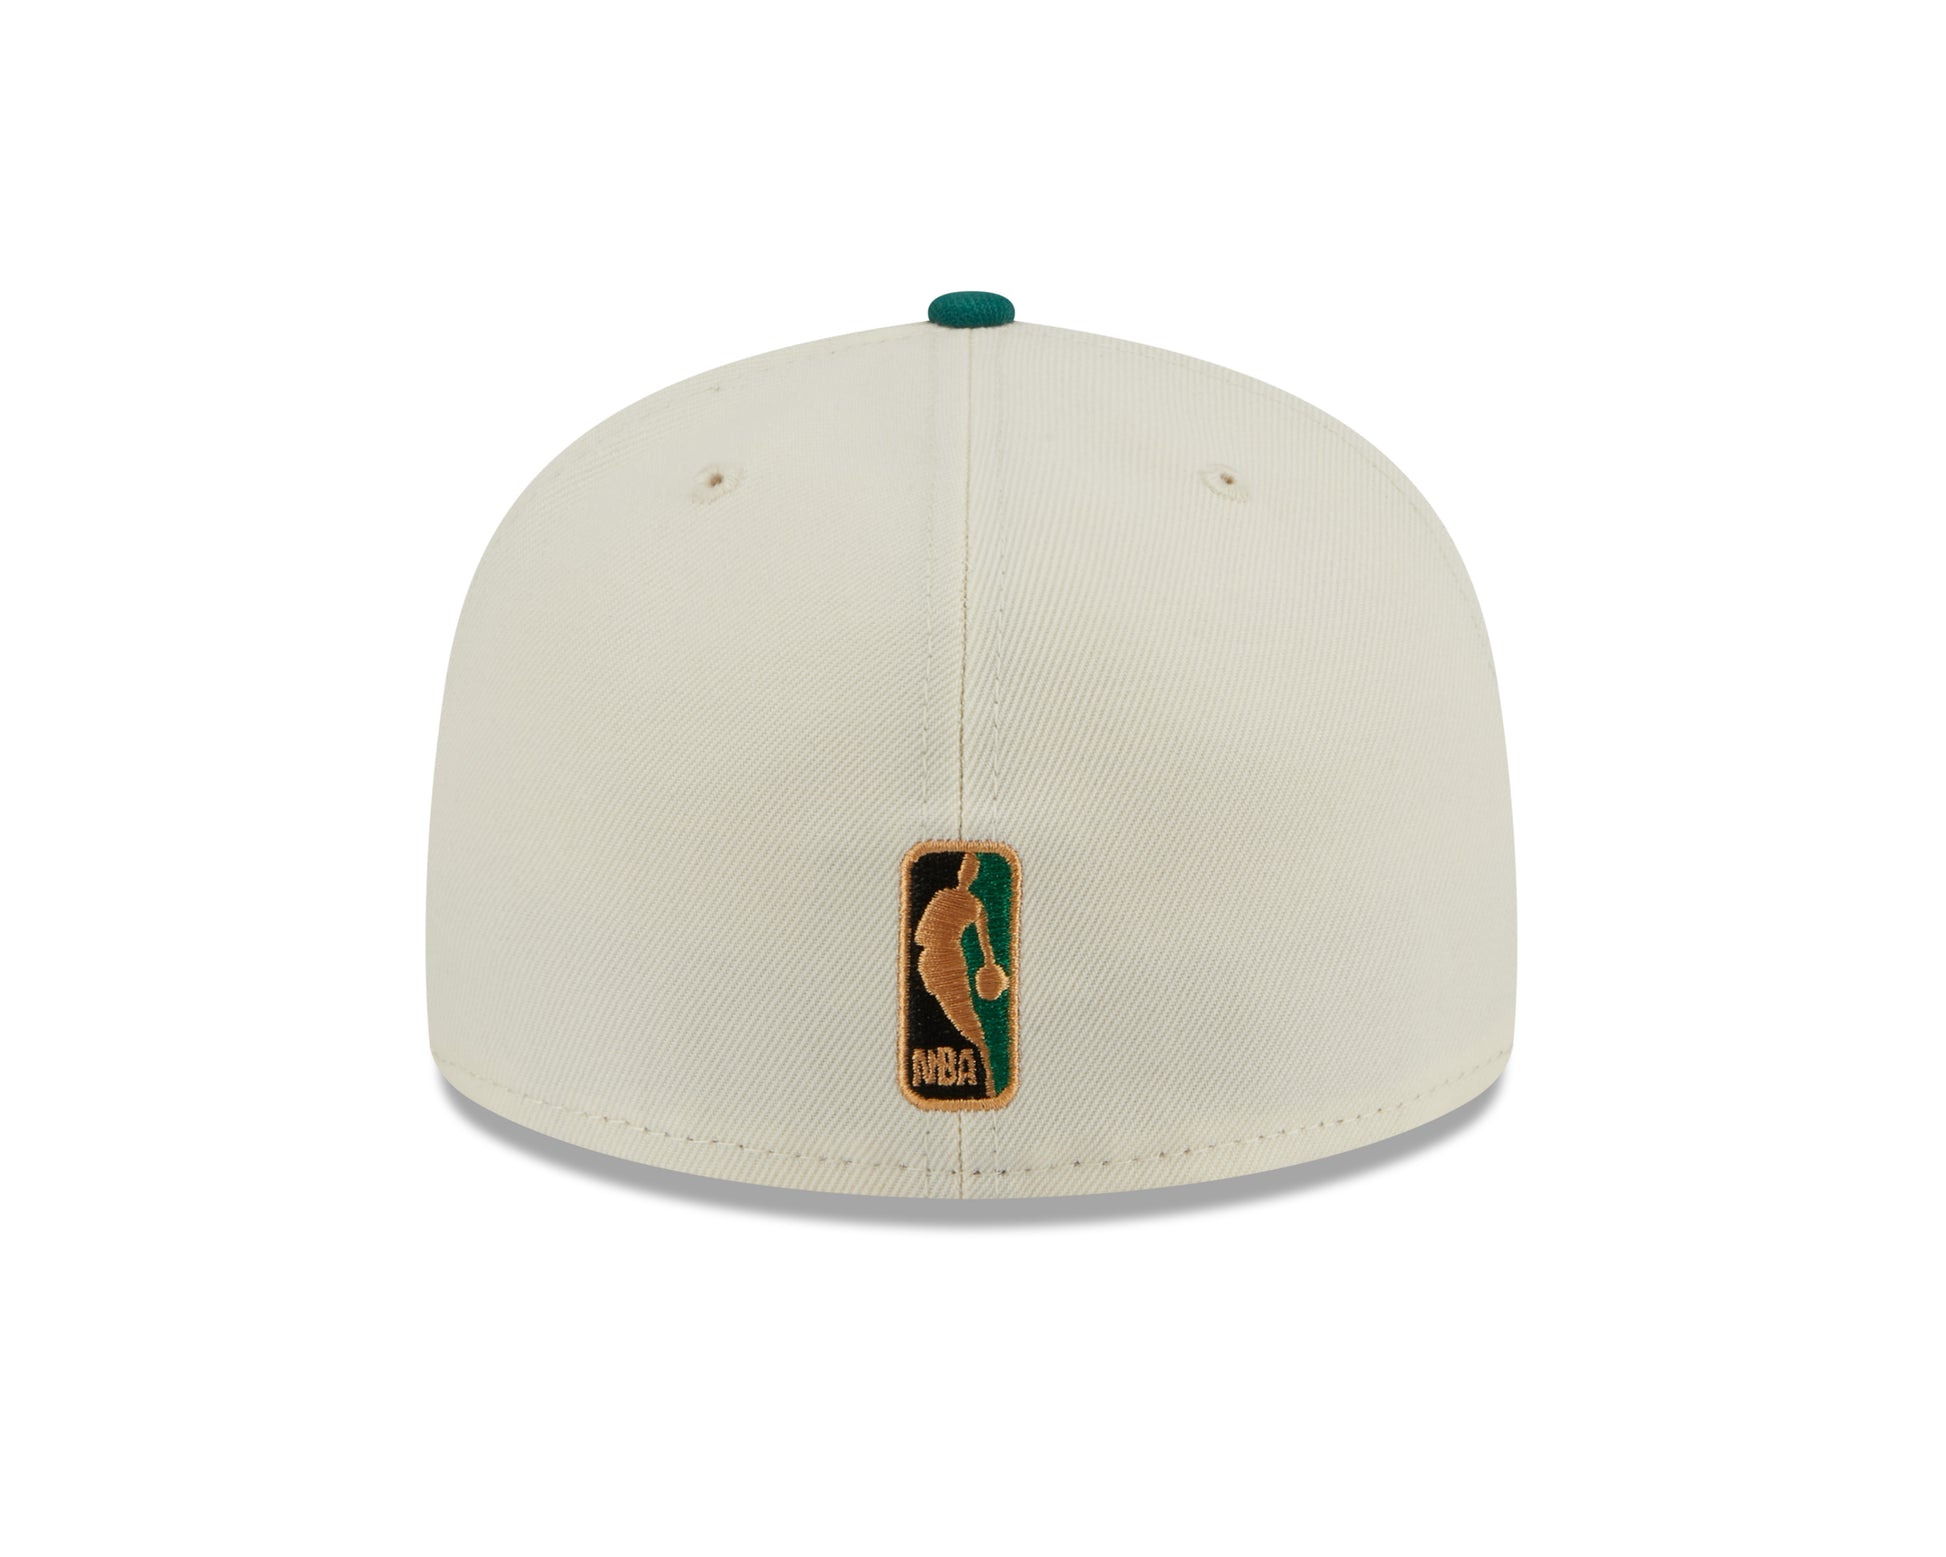 New Era - 59Fifty Fitted Cap - CAMP - Golden State Warriors - White/Green - Headz Up 